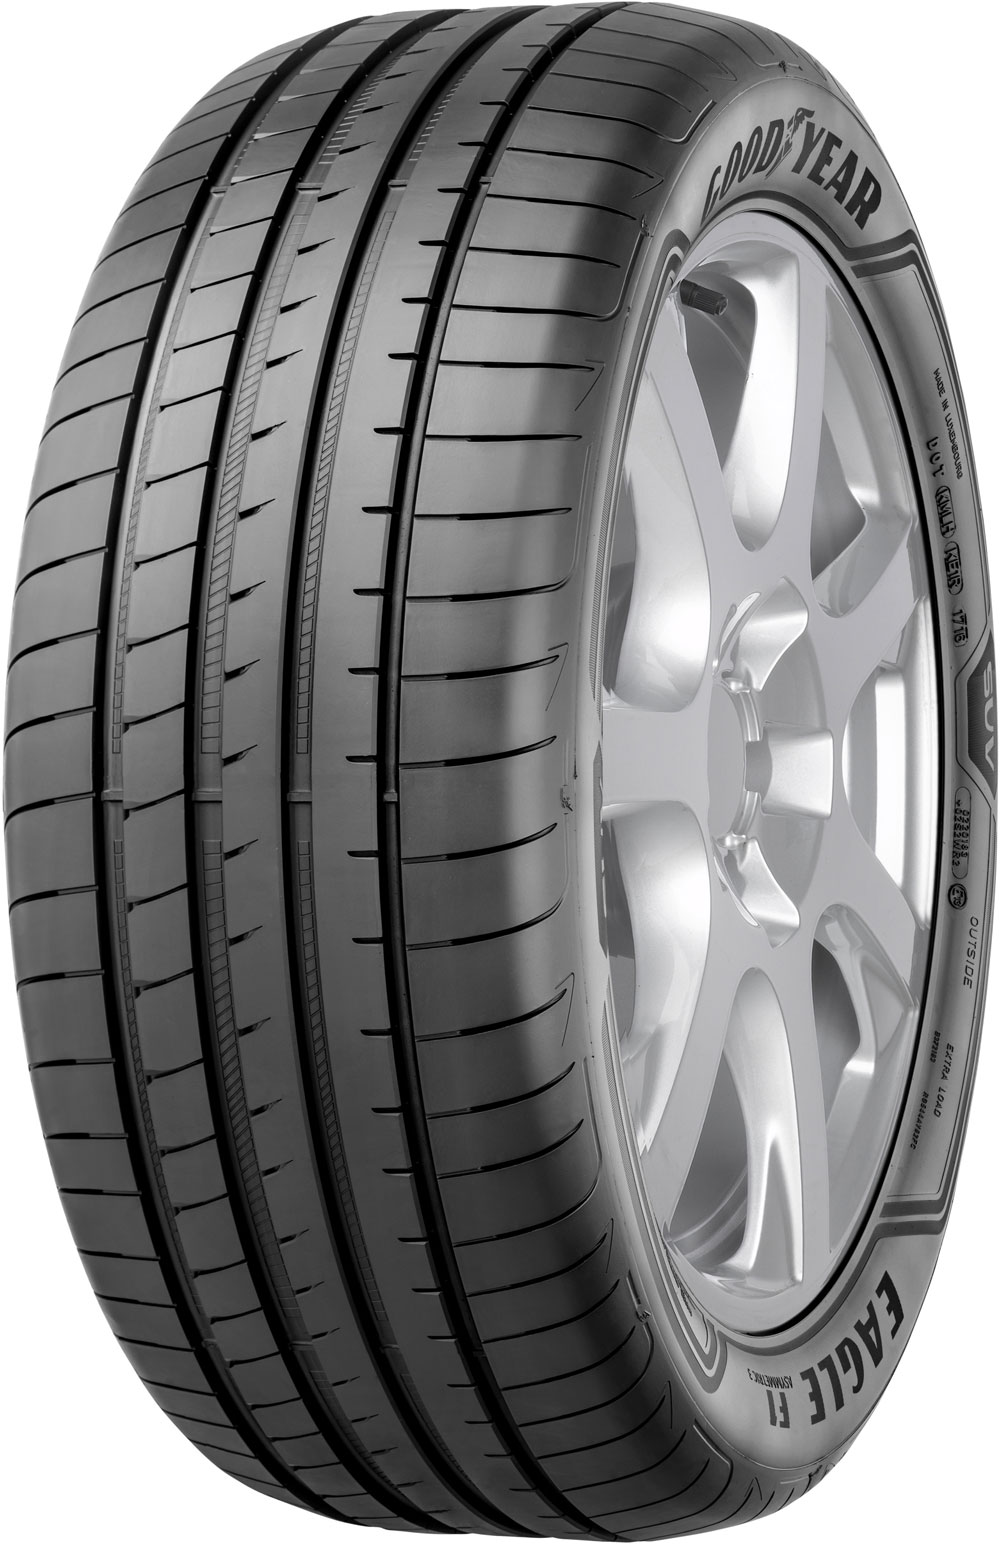 Anvelope auto GOODYEAR EAGF1AS3JX XL FP 245/45 R18 100Y